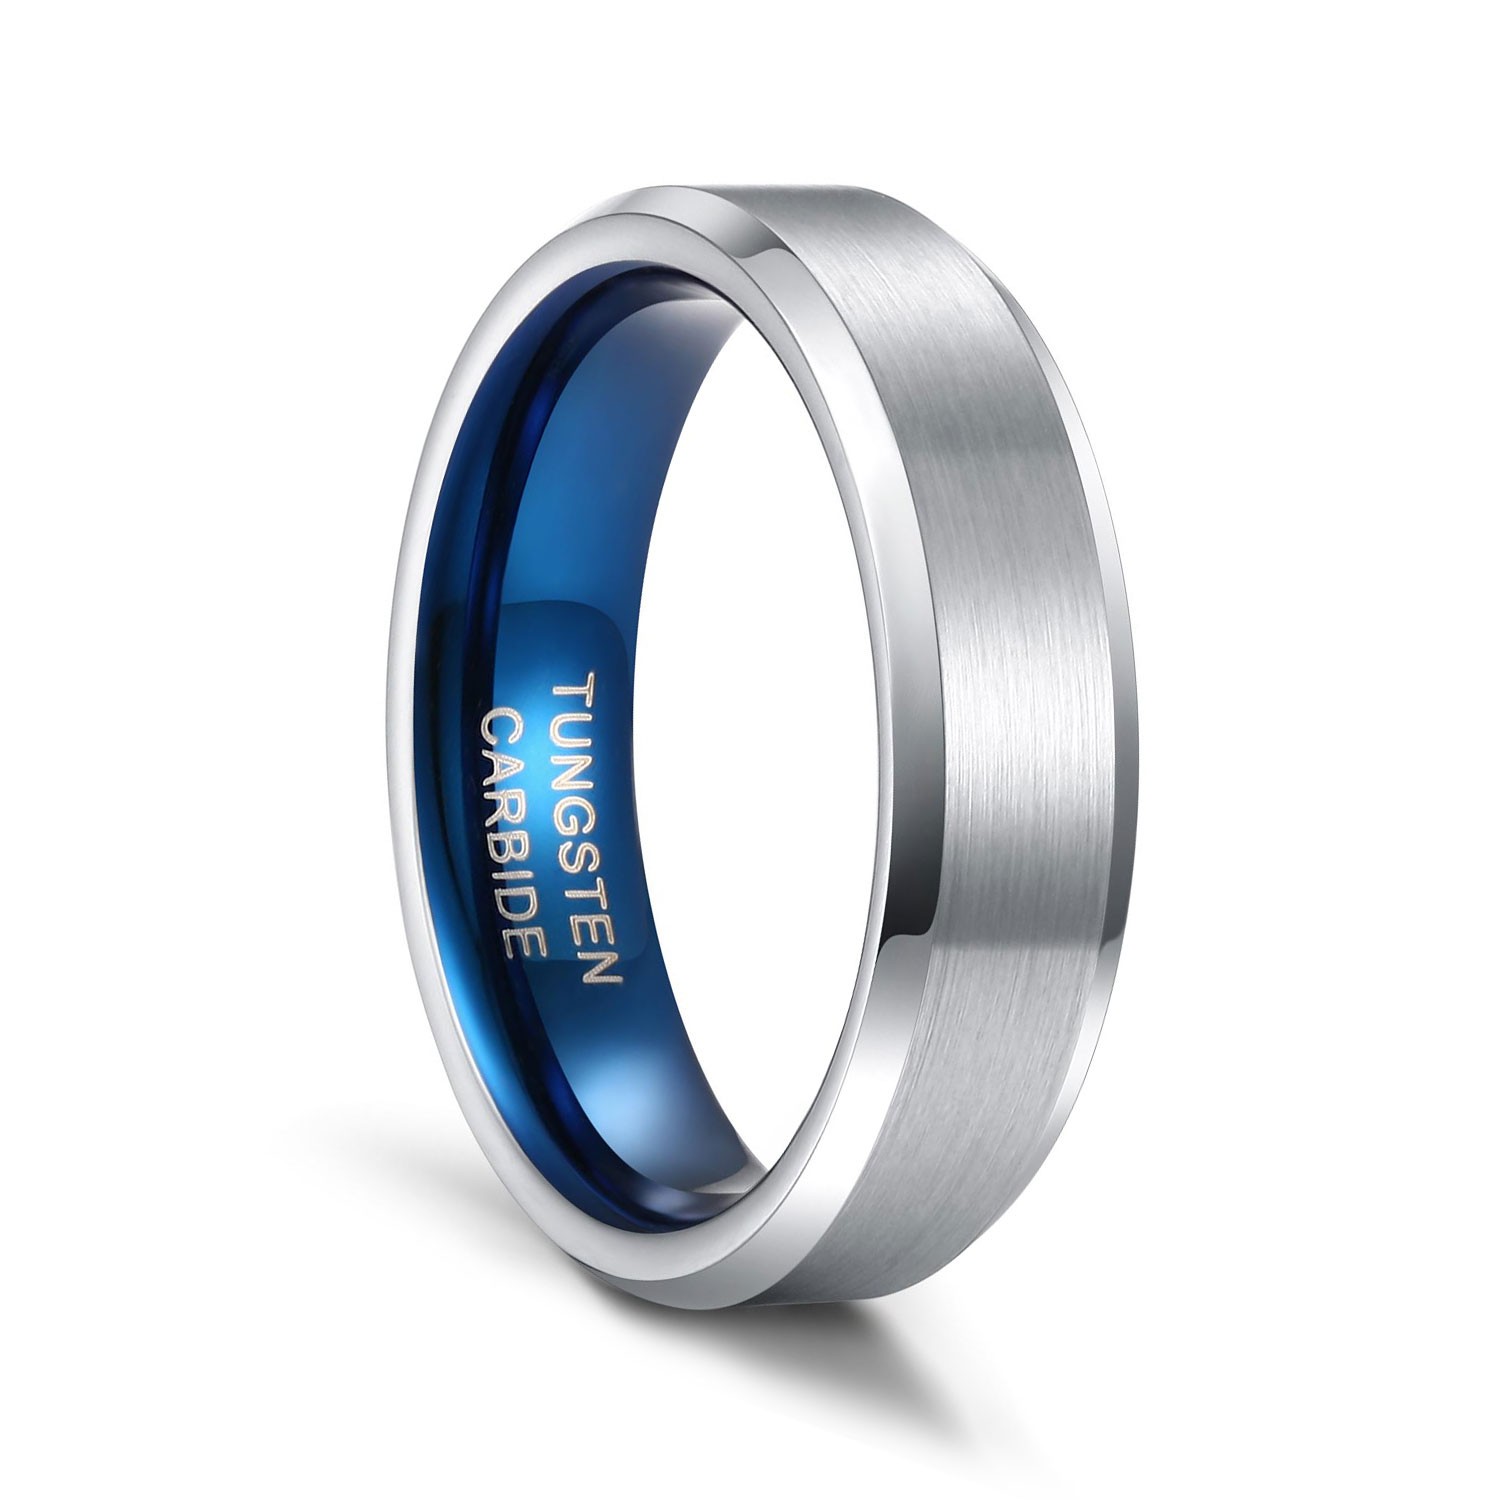 Blue and Silver Tungsten Rings with Brushed Center 4 - 8mm